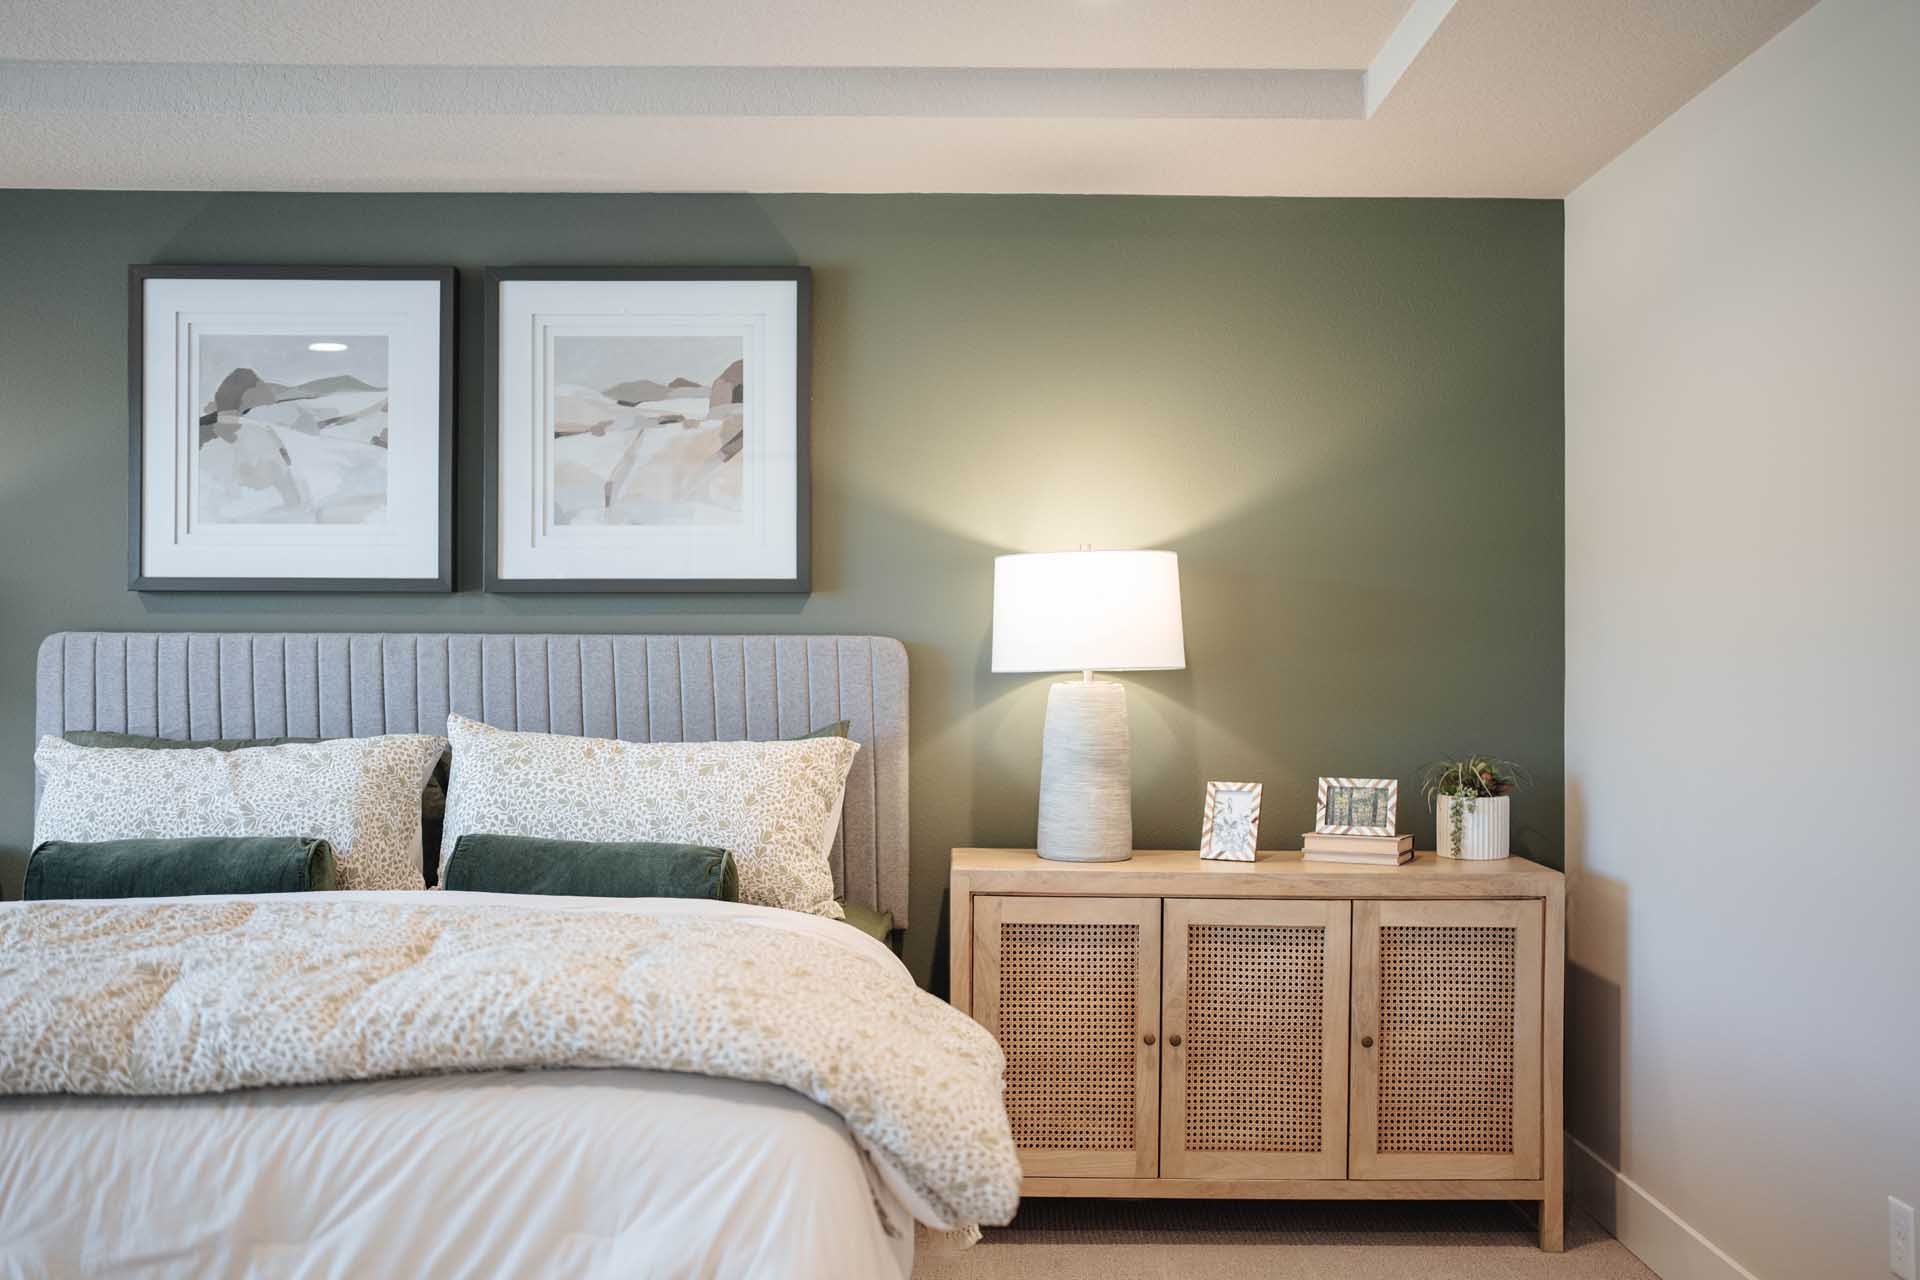 Bedroom with a green wall and a neutral color wood bedside table